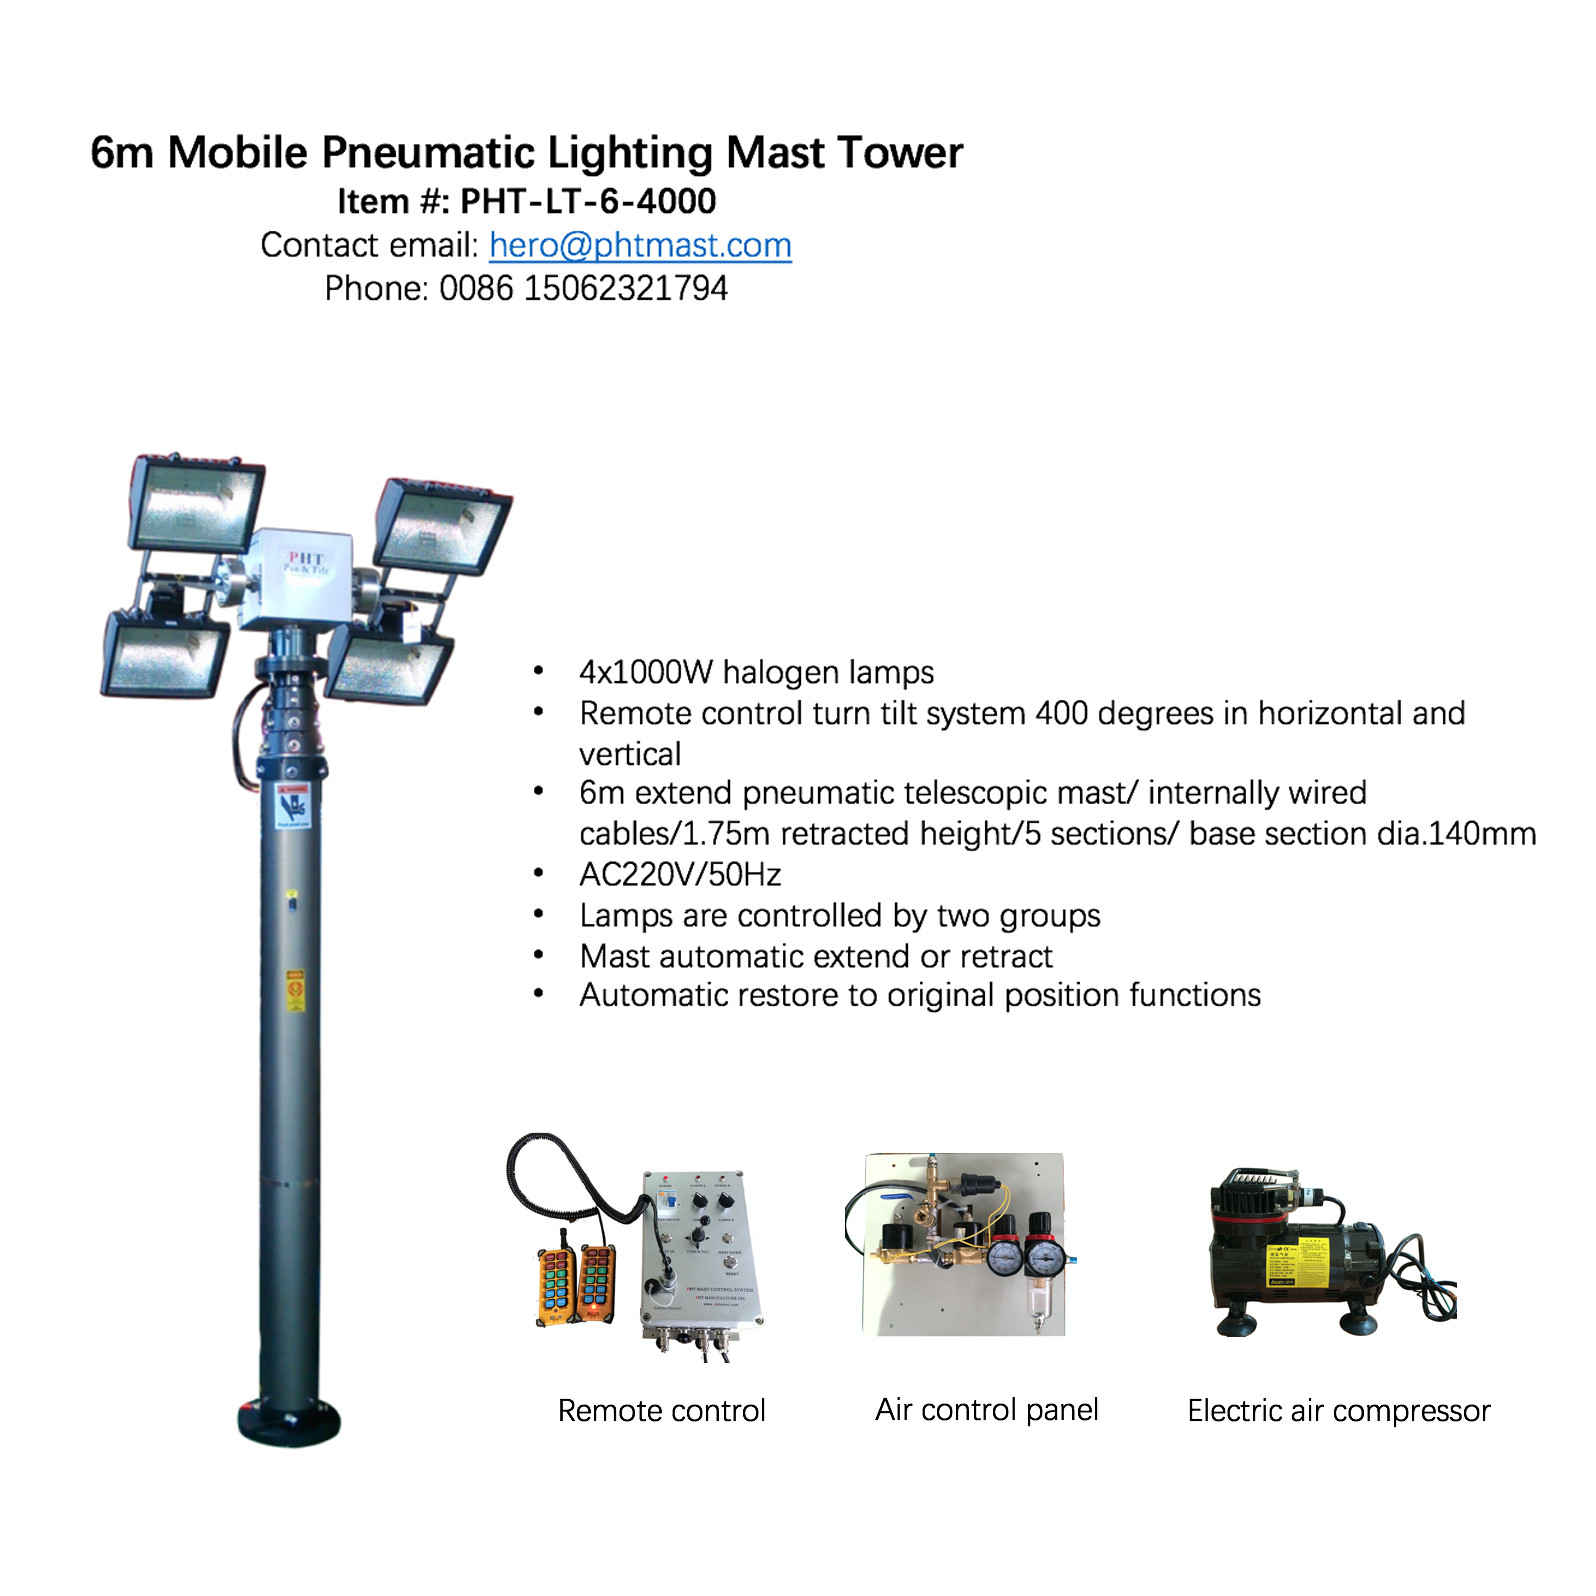 6m pneumatic telescopic lighting mast with 4000W lamps and remote turn tilt control system